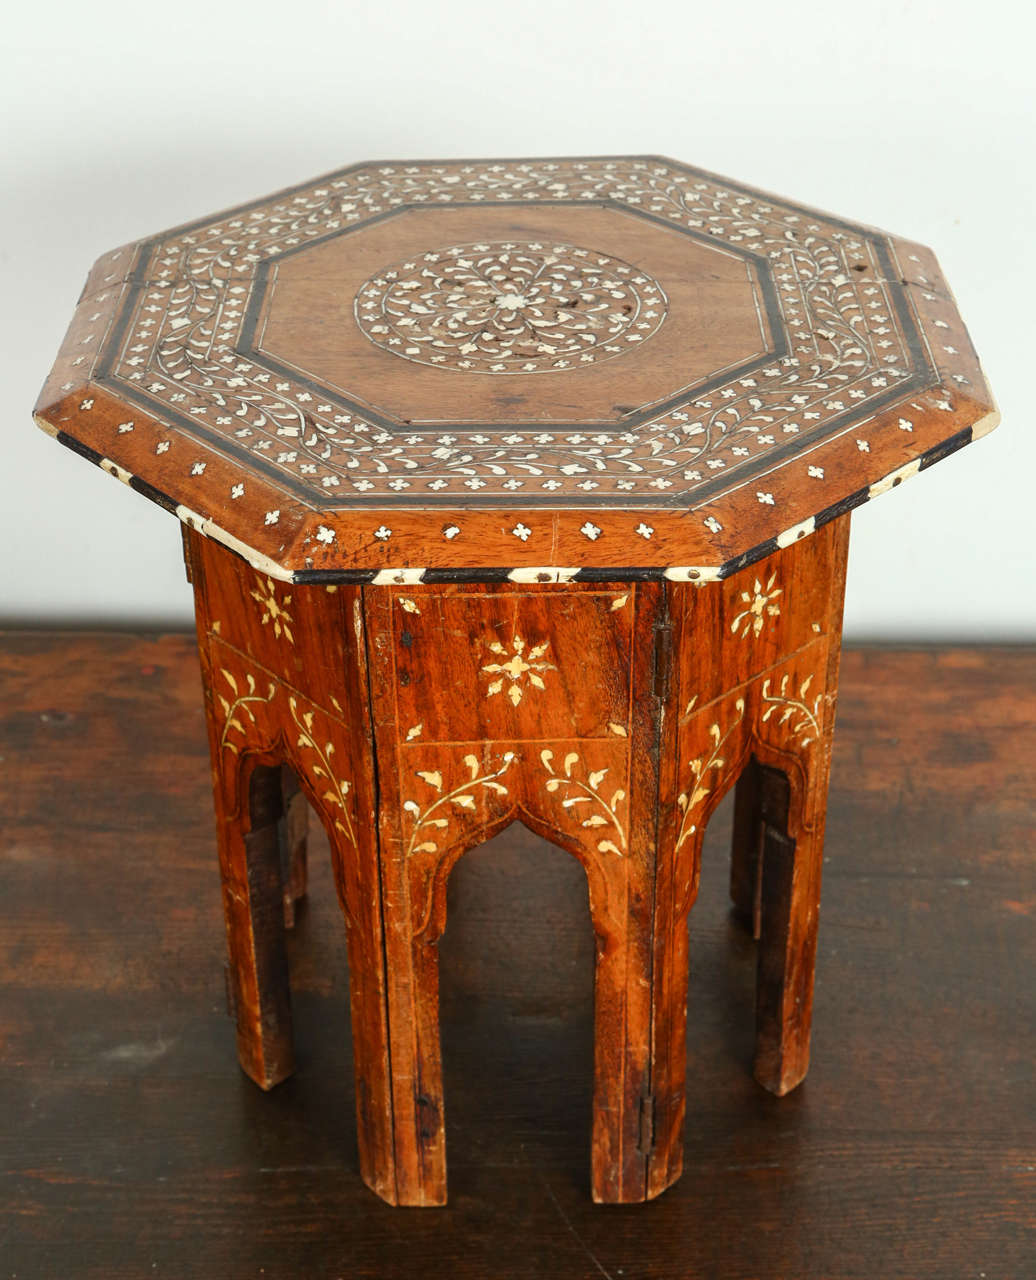 Small bone and ebony inlaid octagonal table, Anglo-India tabouret.
A late 19th century Anglo-Indian rosewood table, the octagonal top with all-over bone inlay featuring an eight-sided central pinwheel medallion, bordered by a scrolling design of